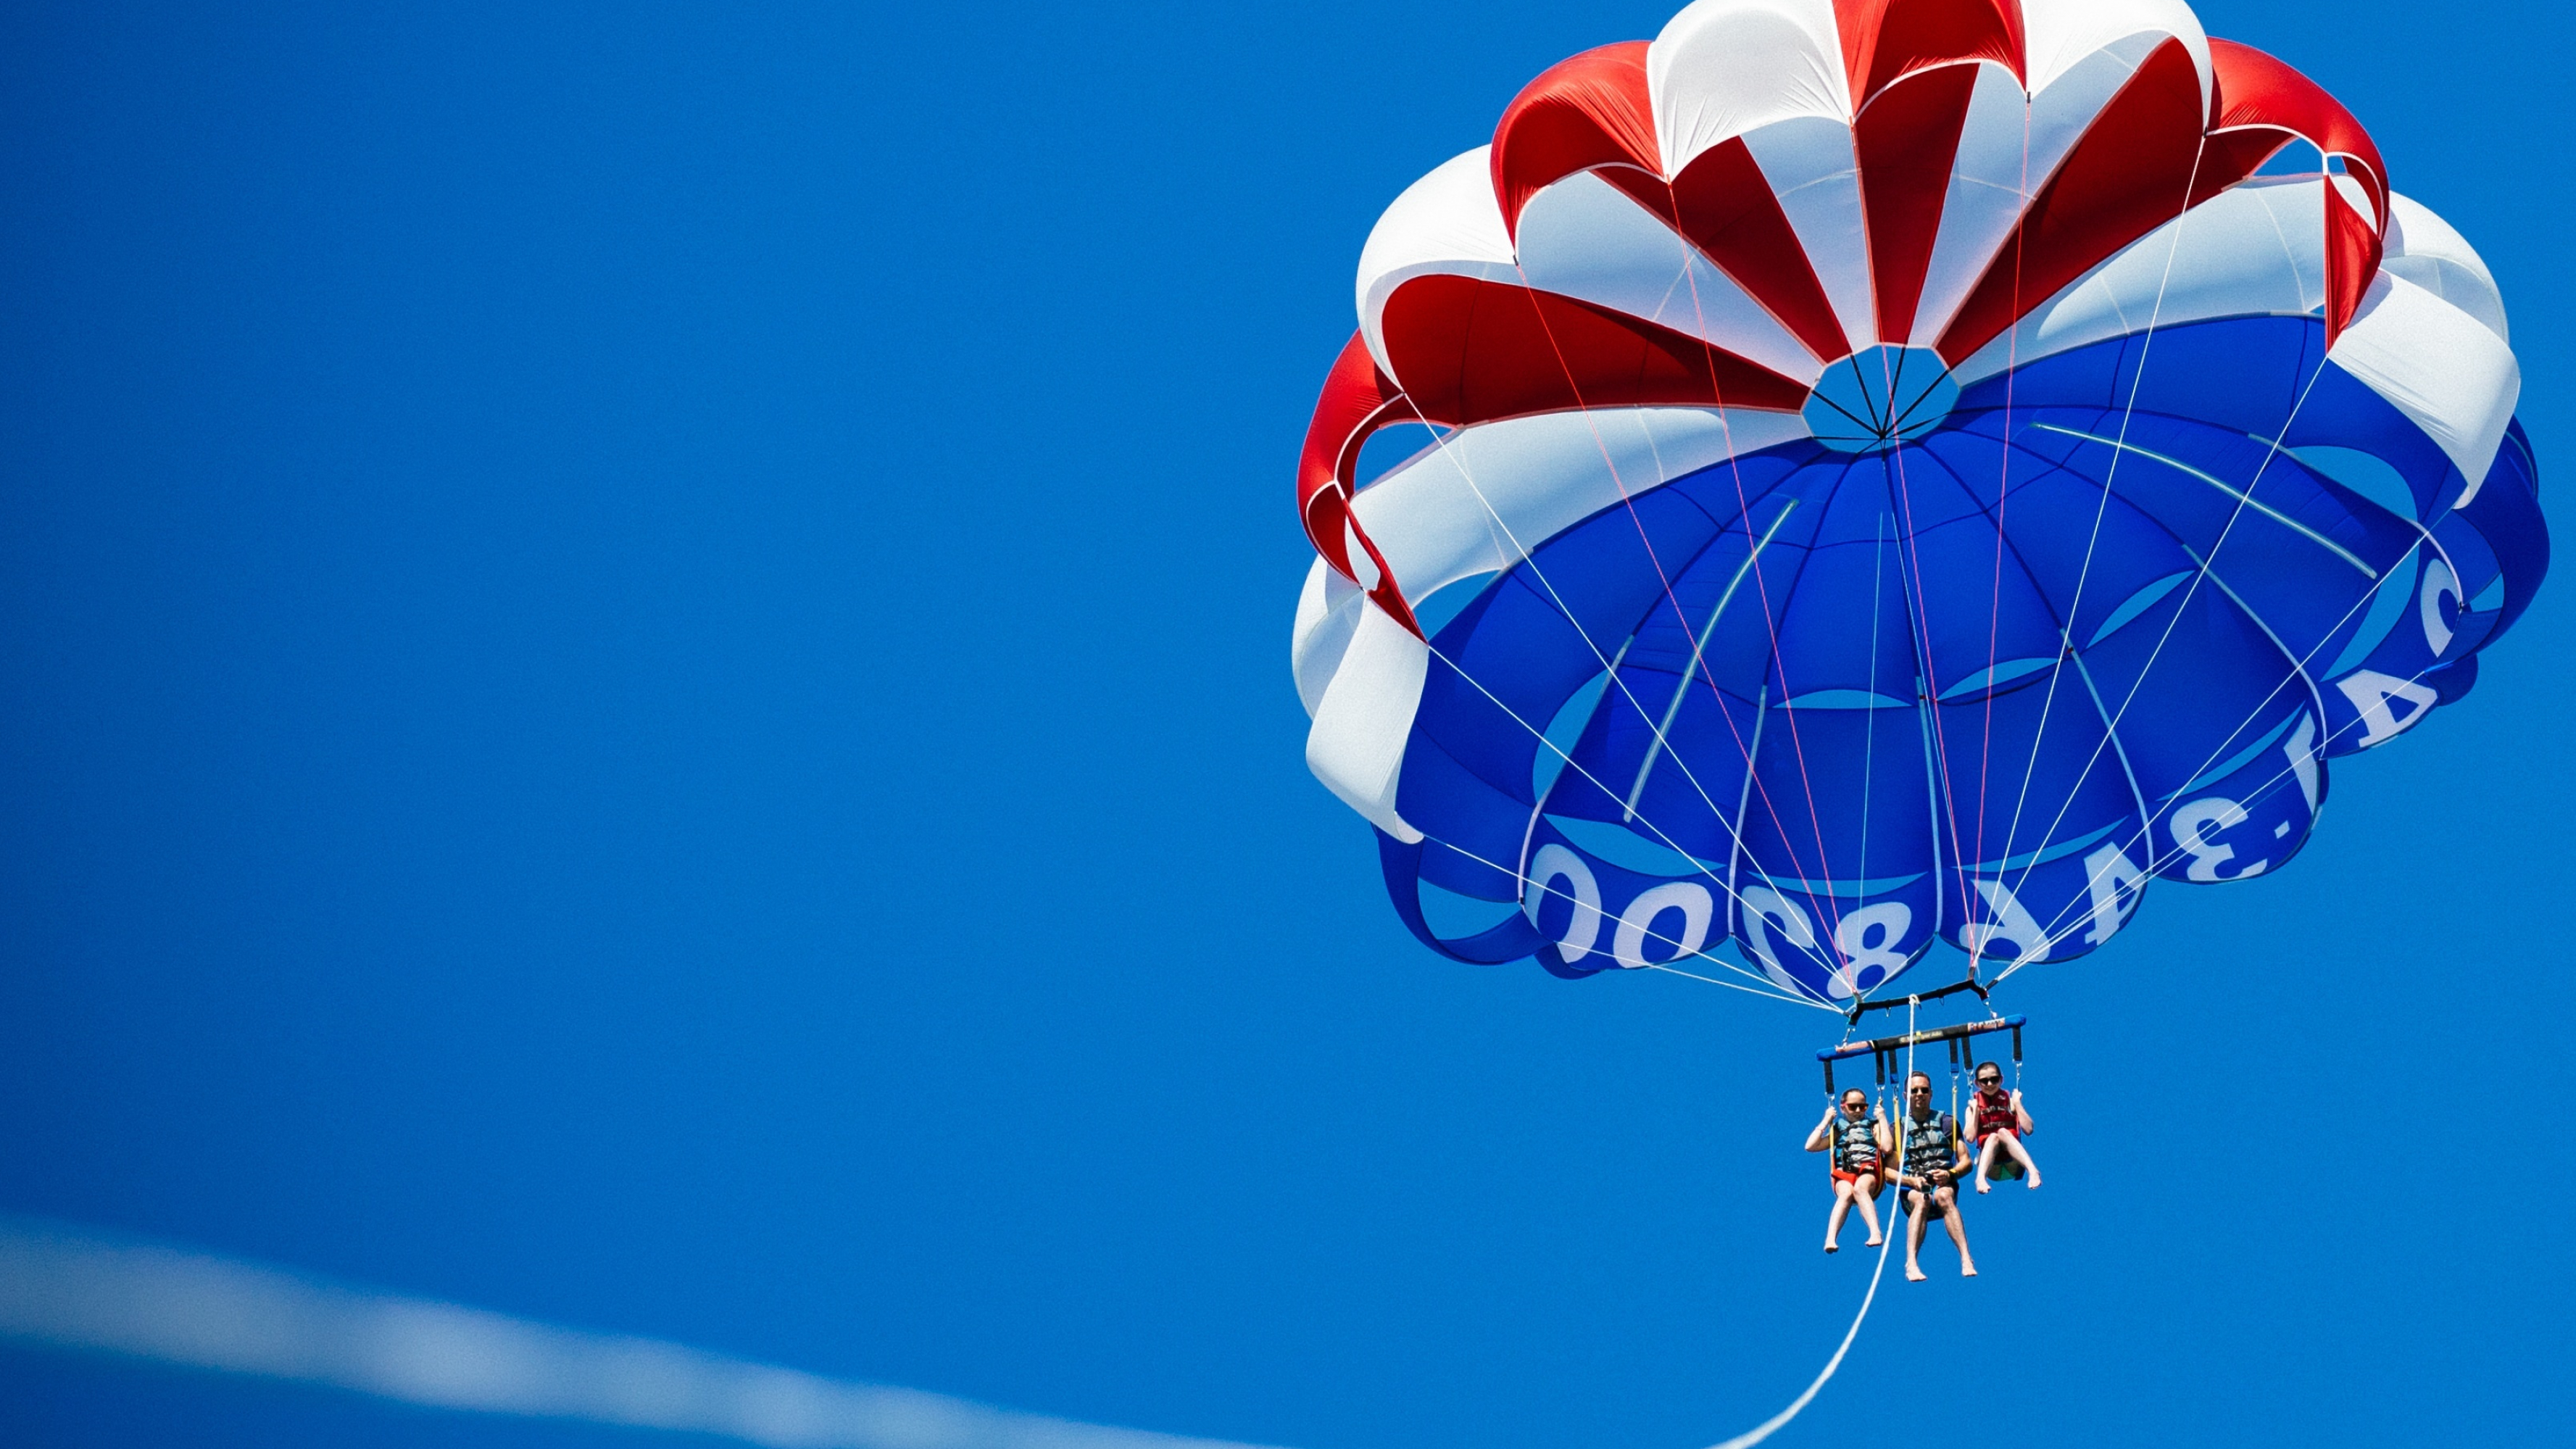 Parasailing: Parachuting sports, Parasail Safety Council, Flying 300 feet above the water. 3560x2000 HD Background.